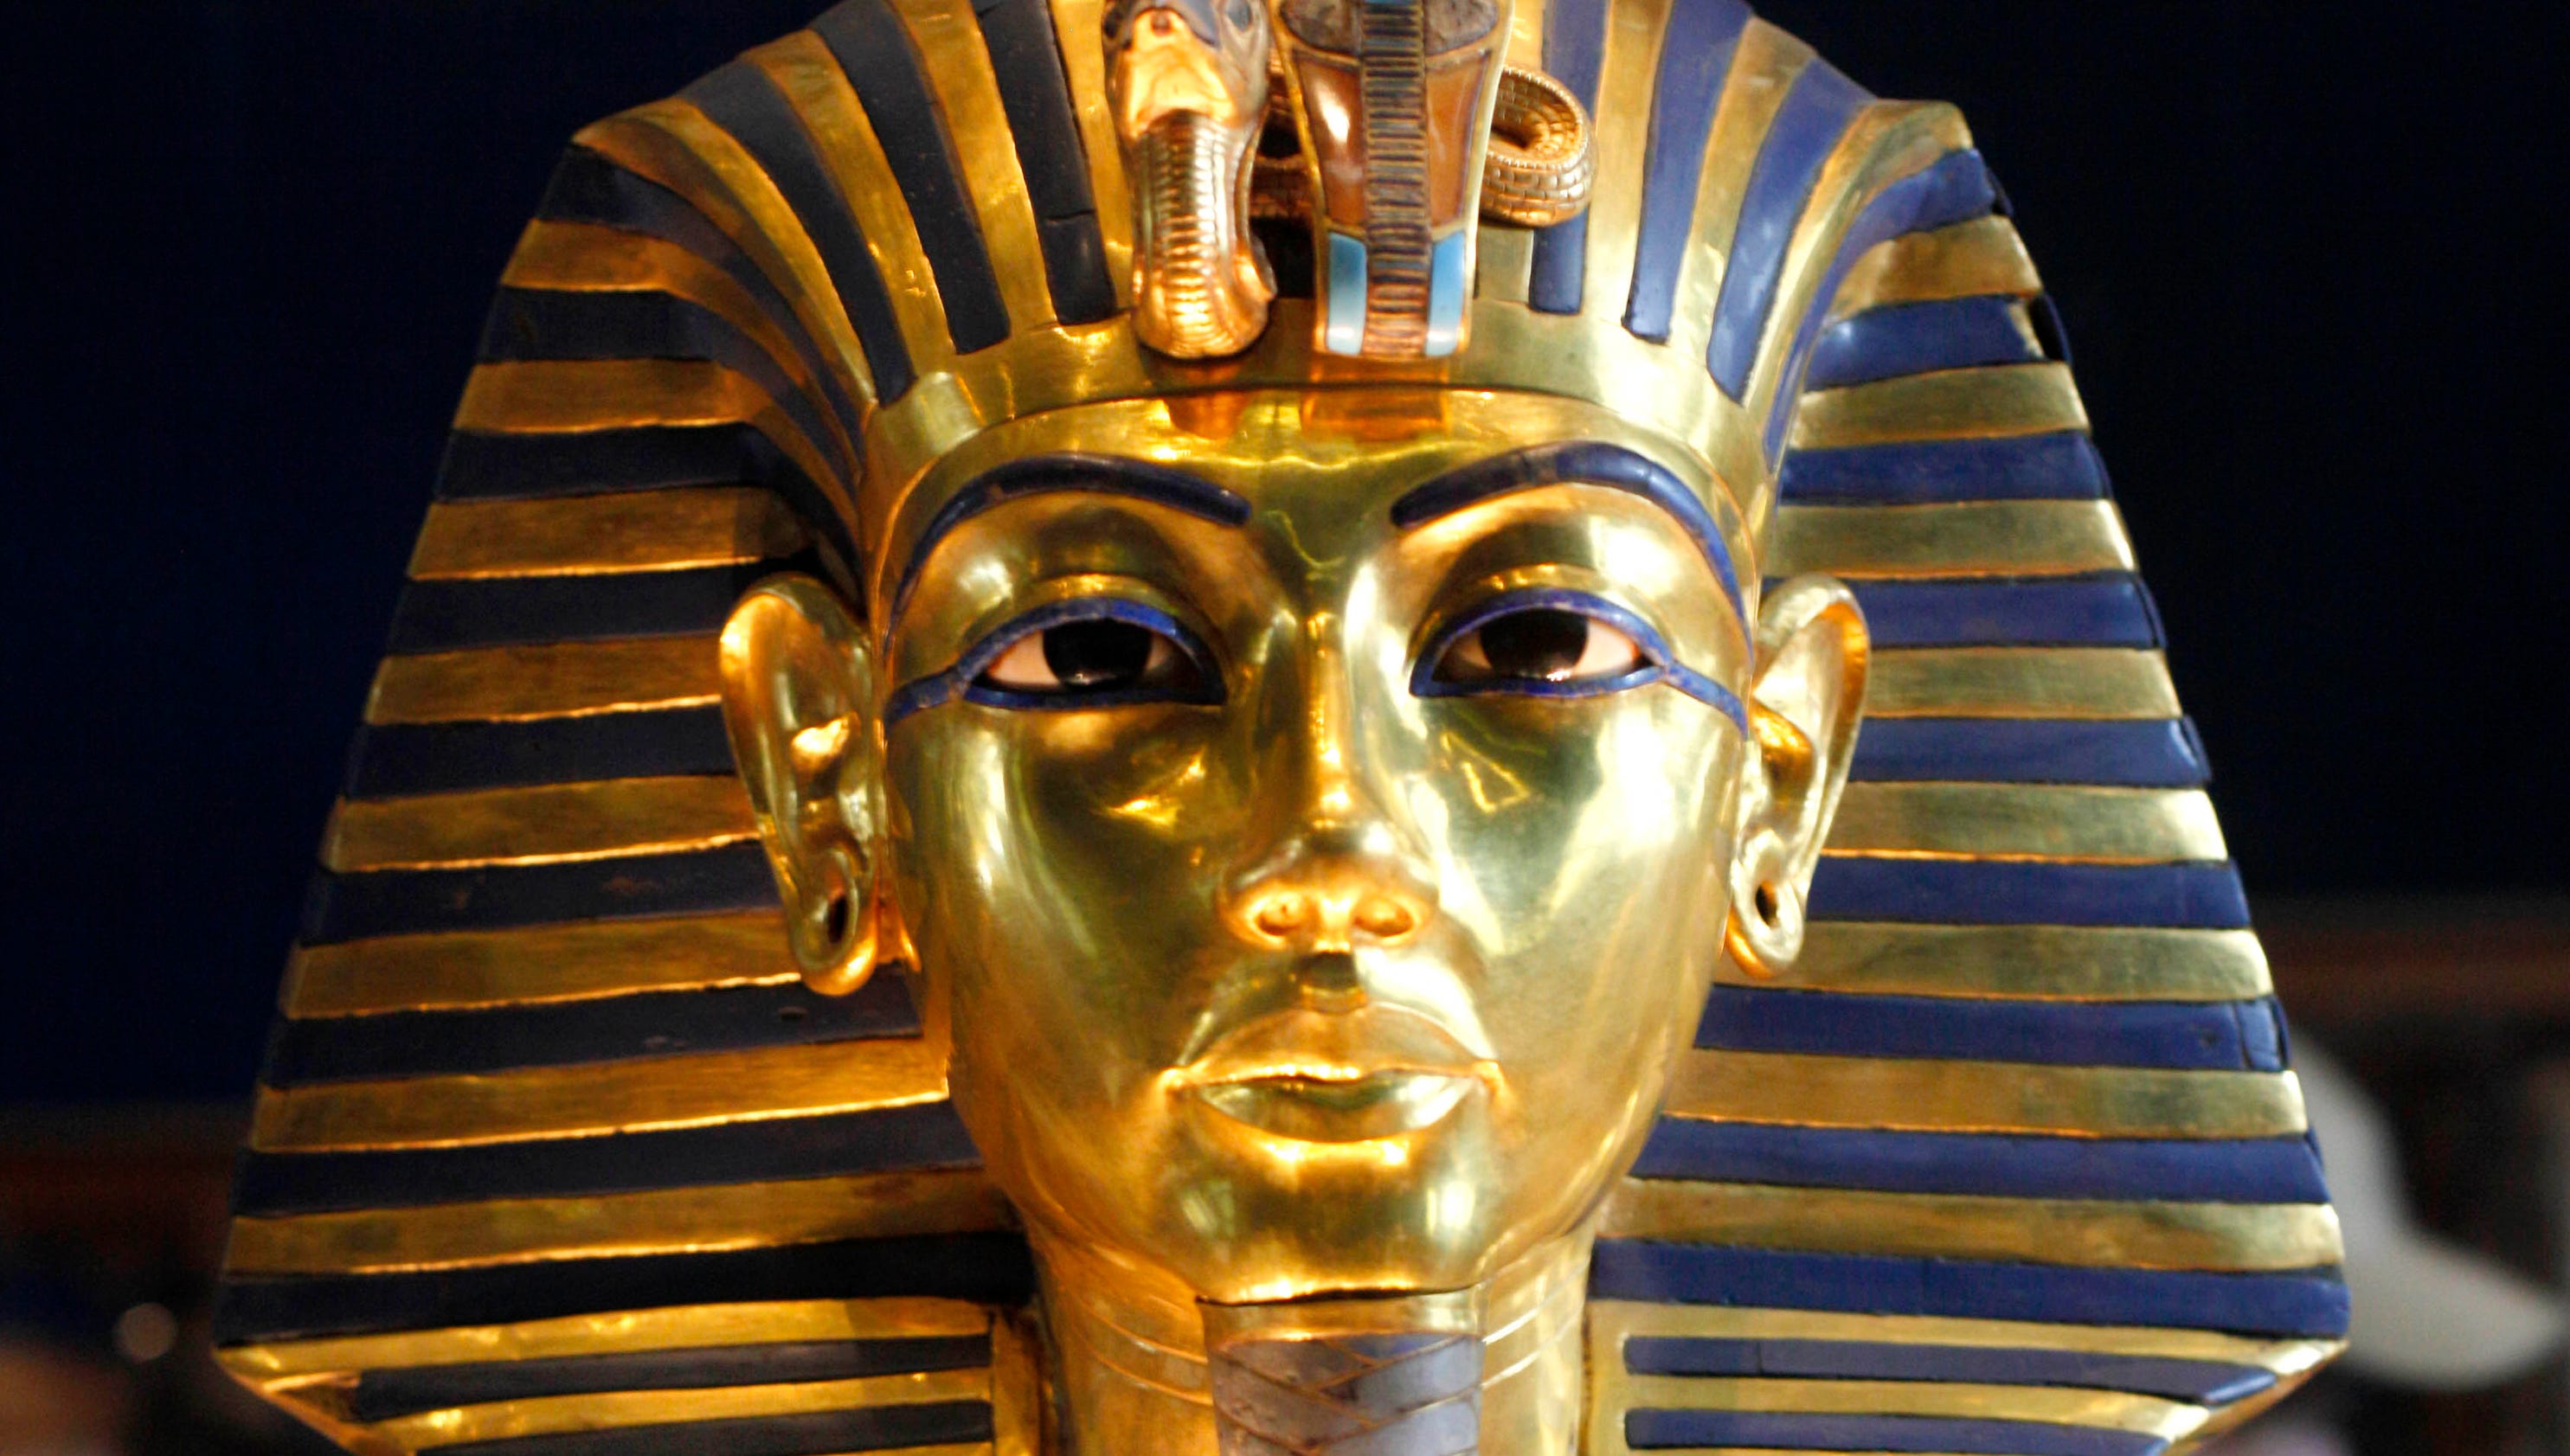 King Tut 'spontaneously combusted' in coffin